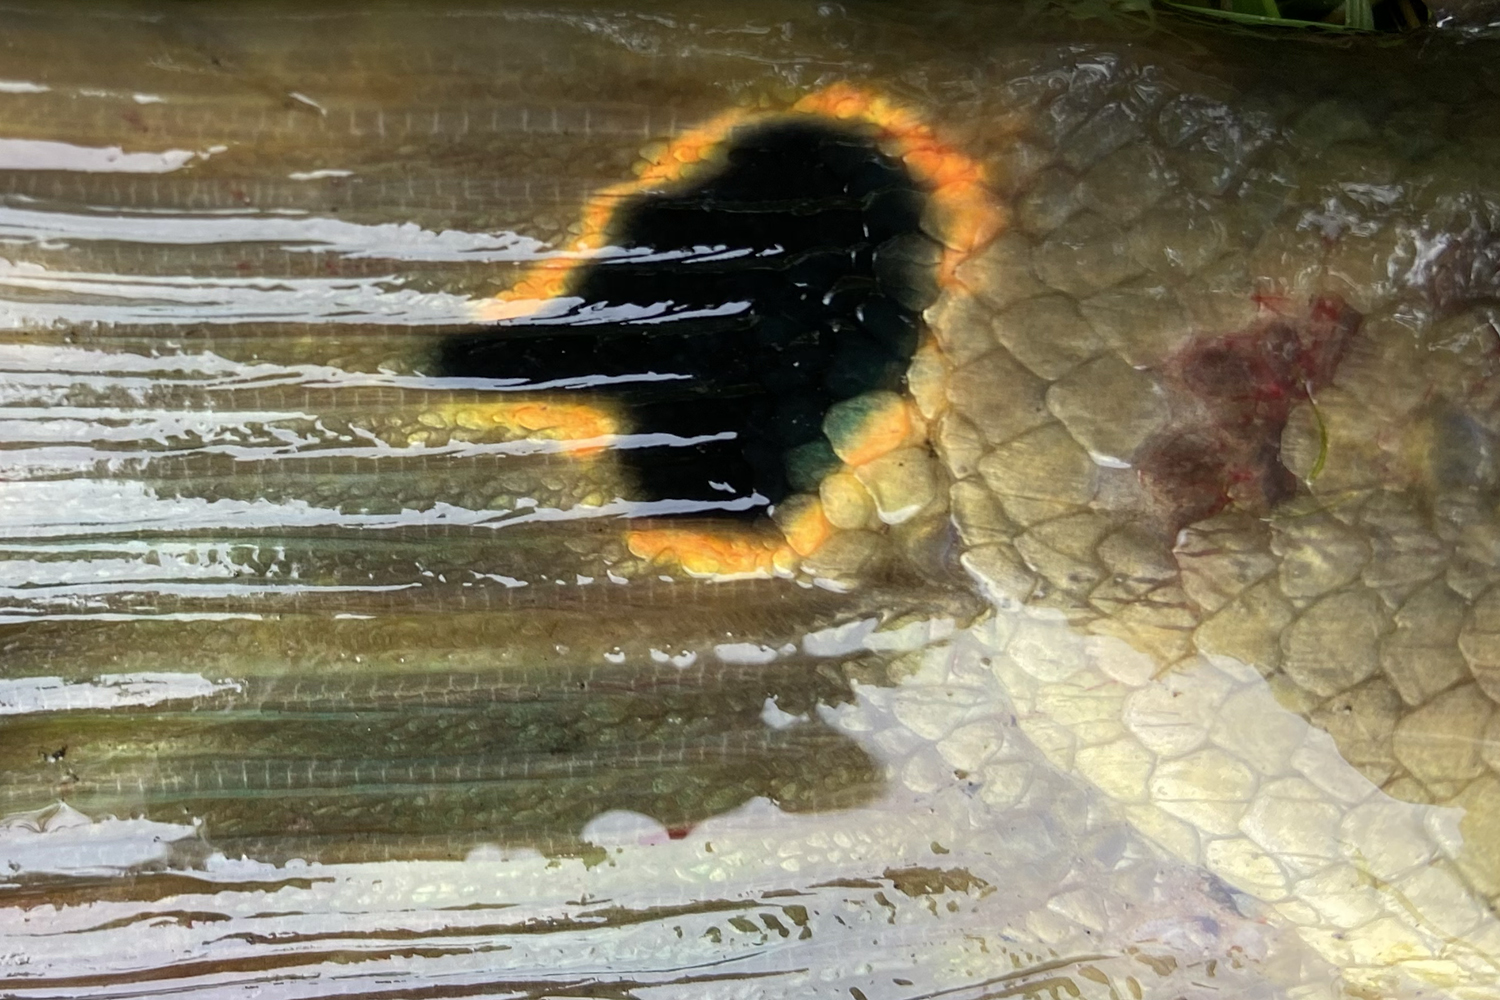 close-up of spot on bowfin near tail